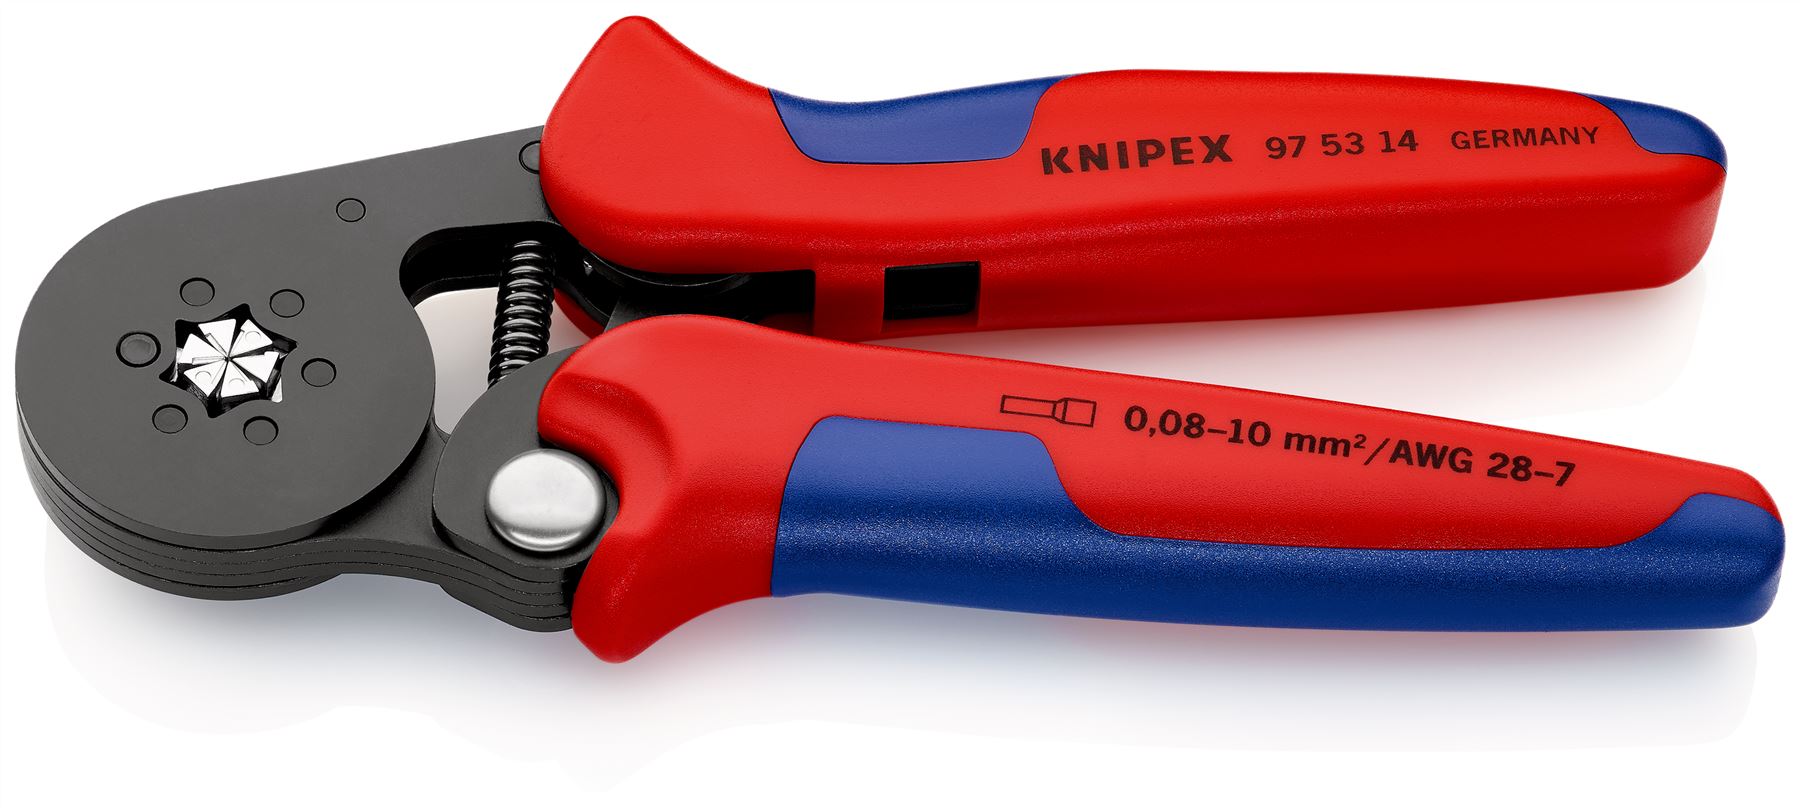 Knipex Automatic Crimping Pliers for Wire Ferrules 0.08-16mm Capacity 97 53 14